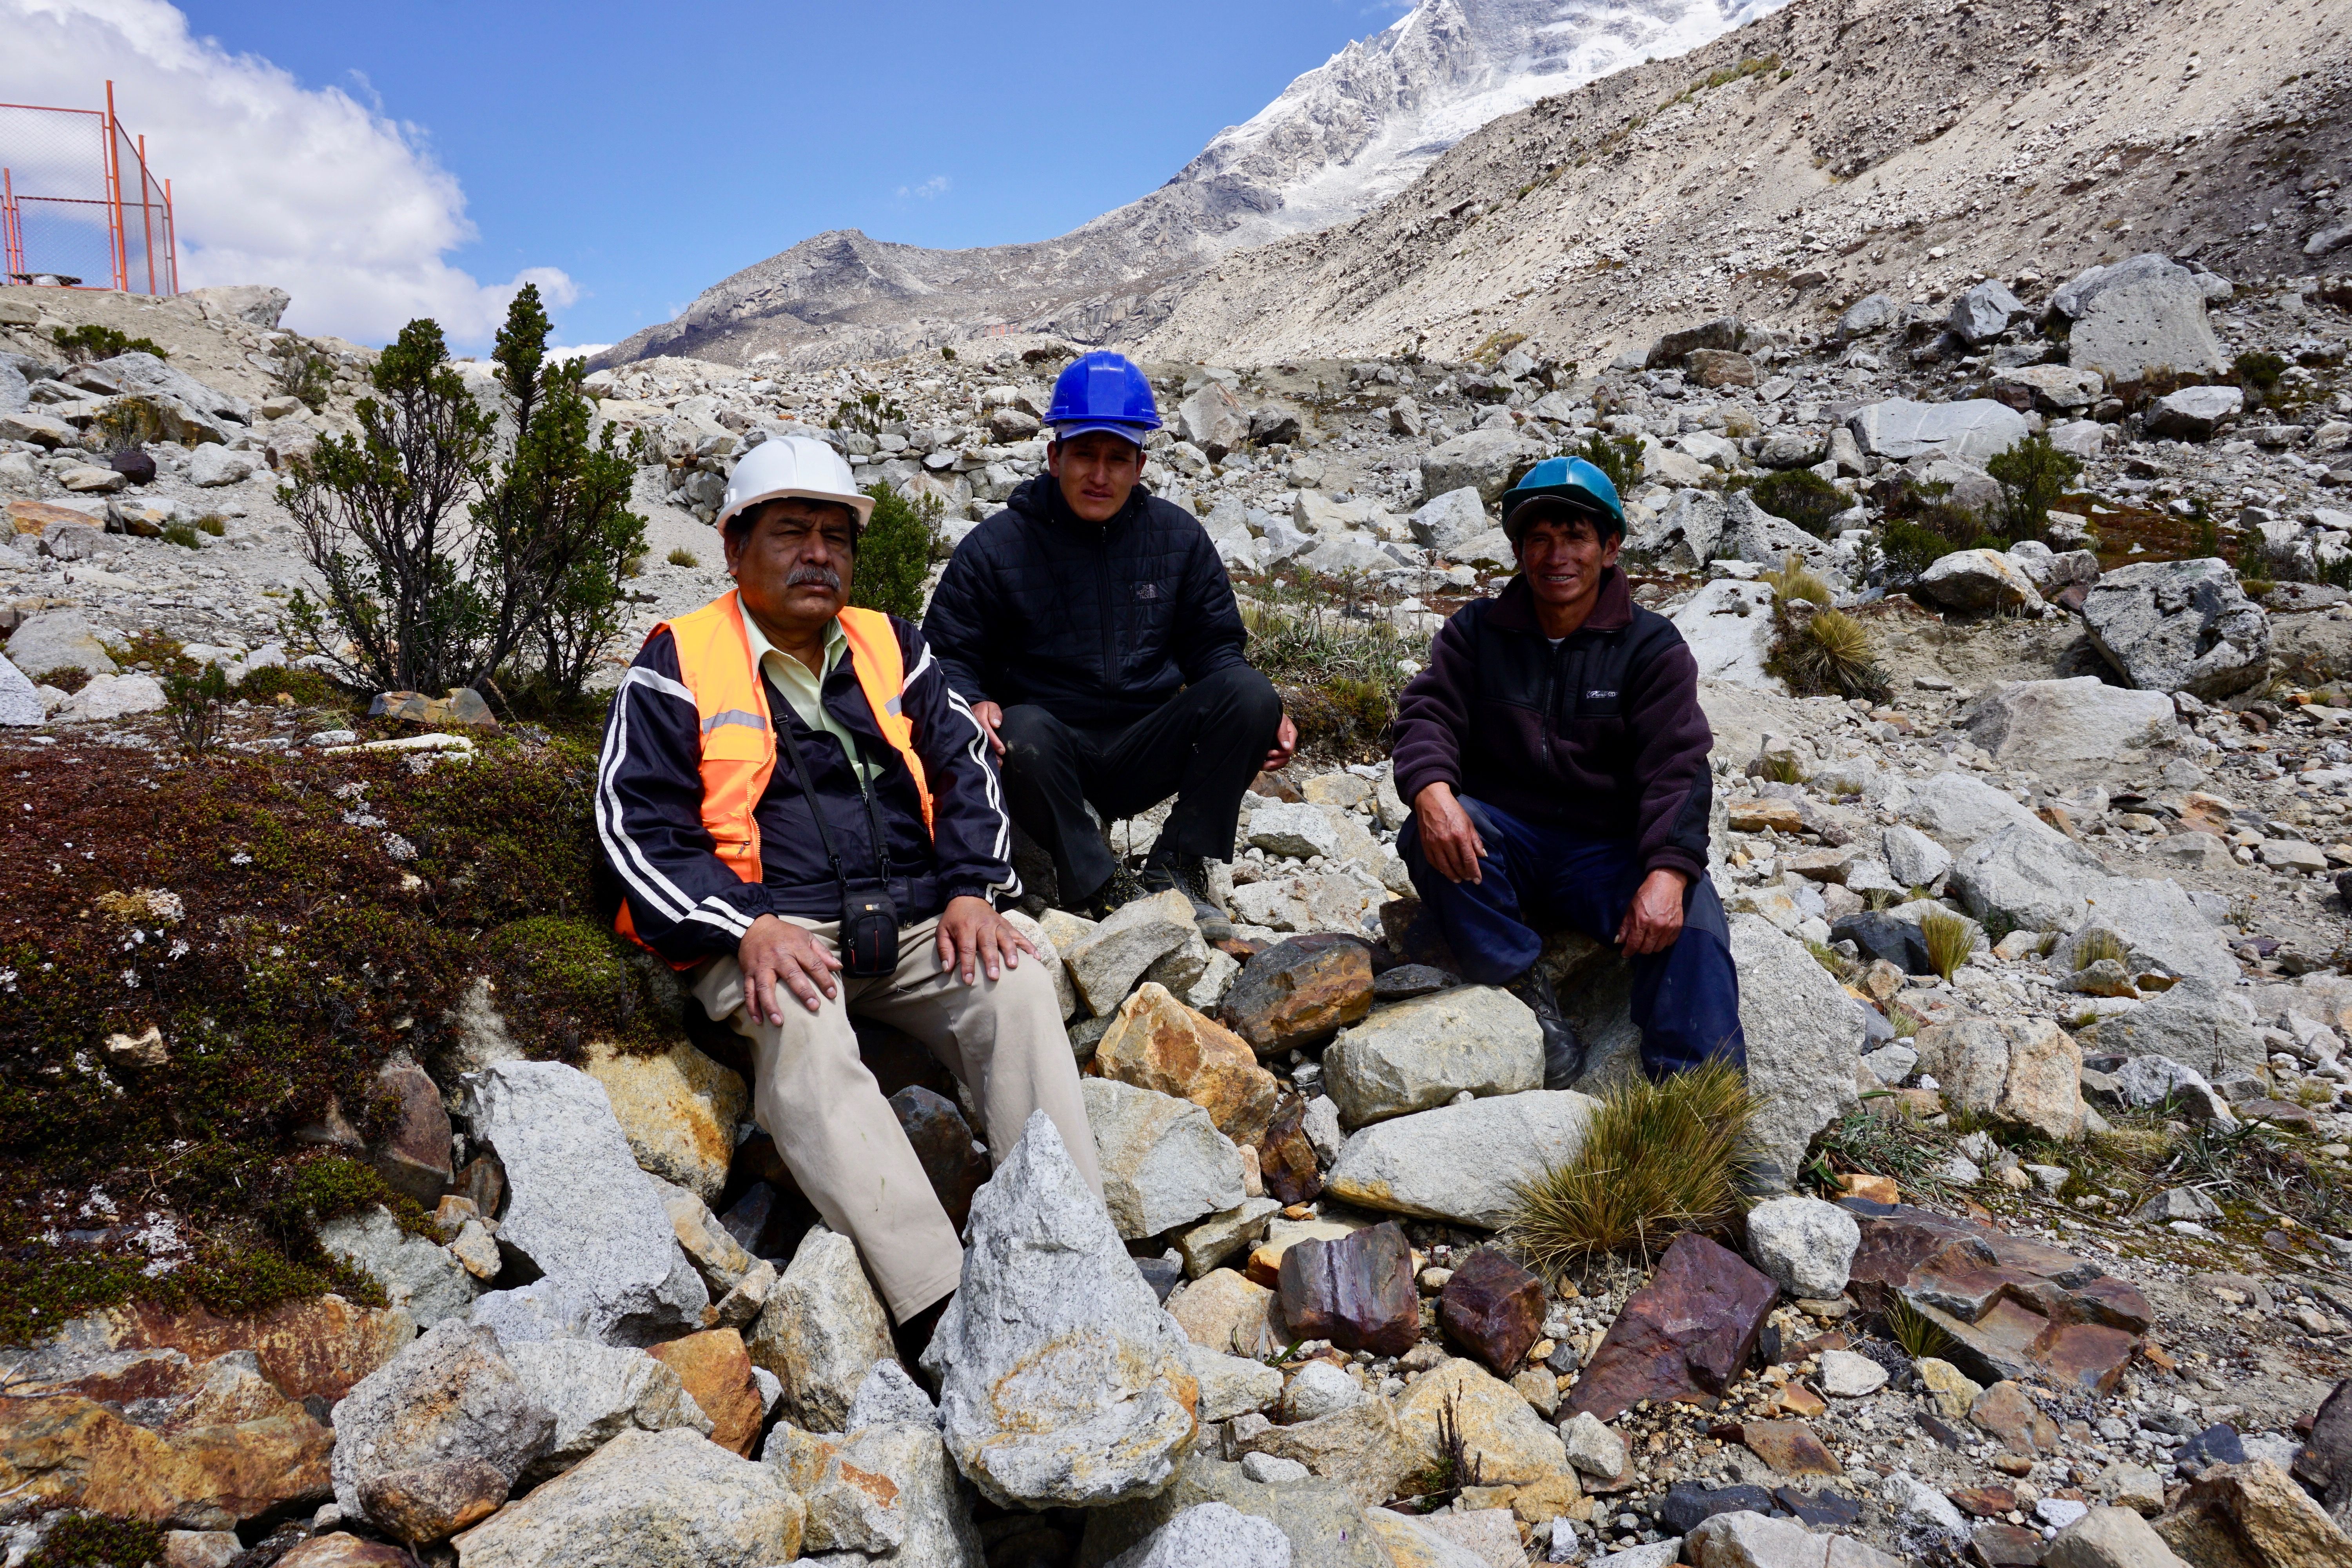 Engineer Beltrán (left), Guardian Marco Reyes (center), and Guardian Víctor Morales (right). Image by Audrey Fromson. Peru, 2019.